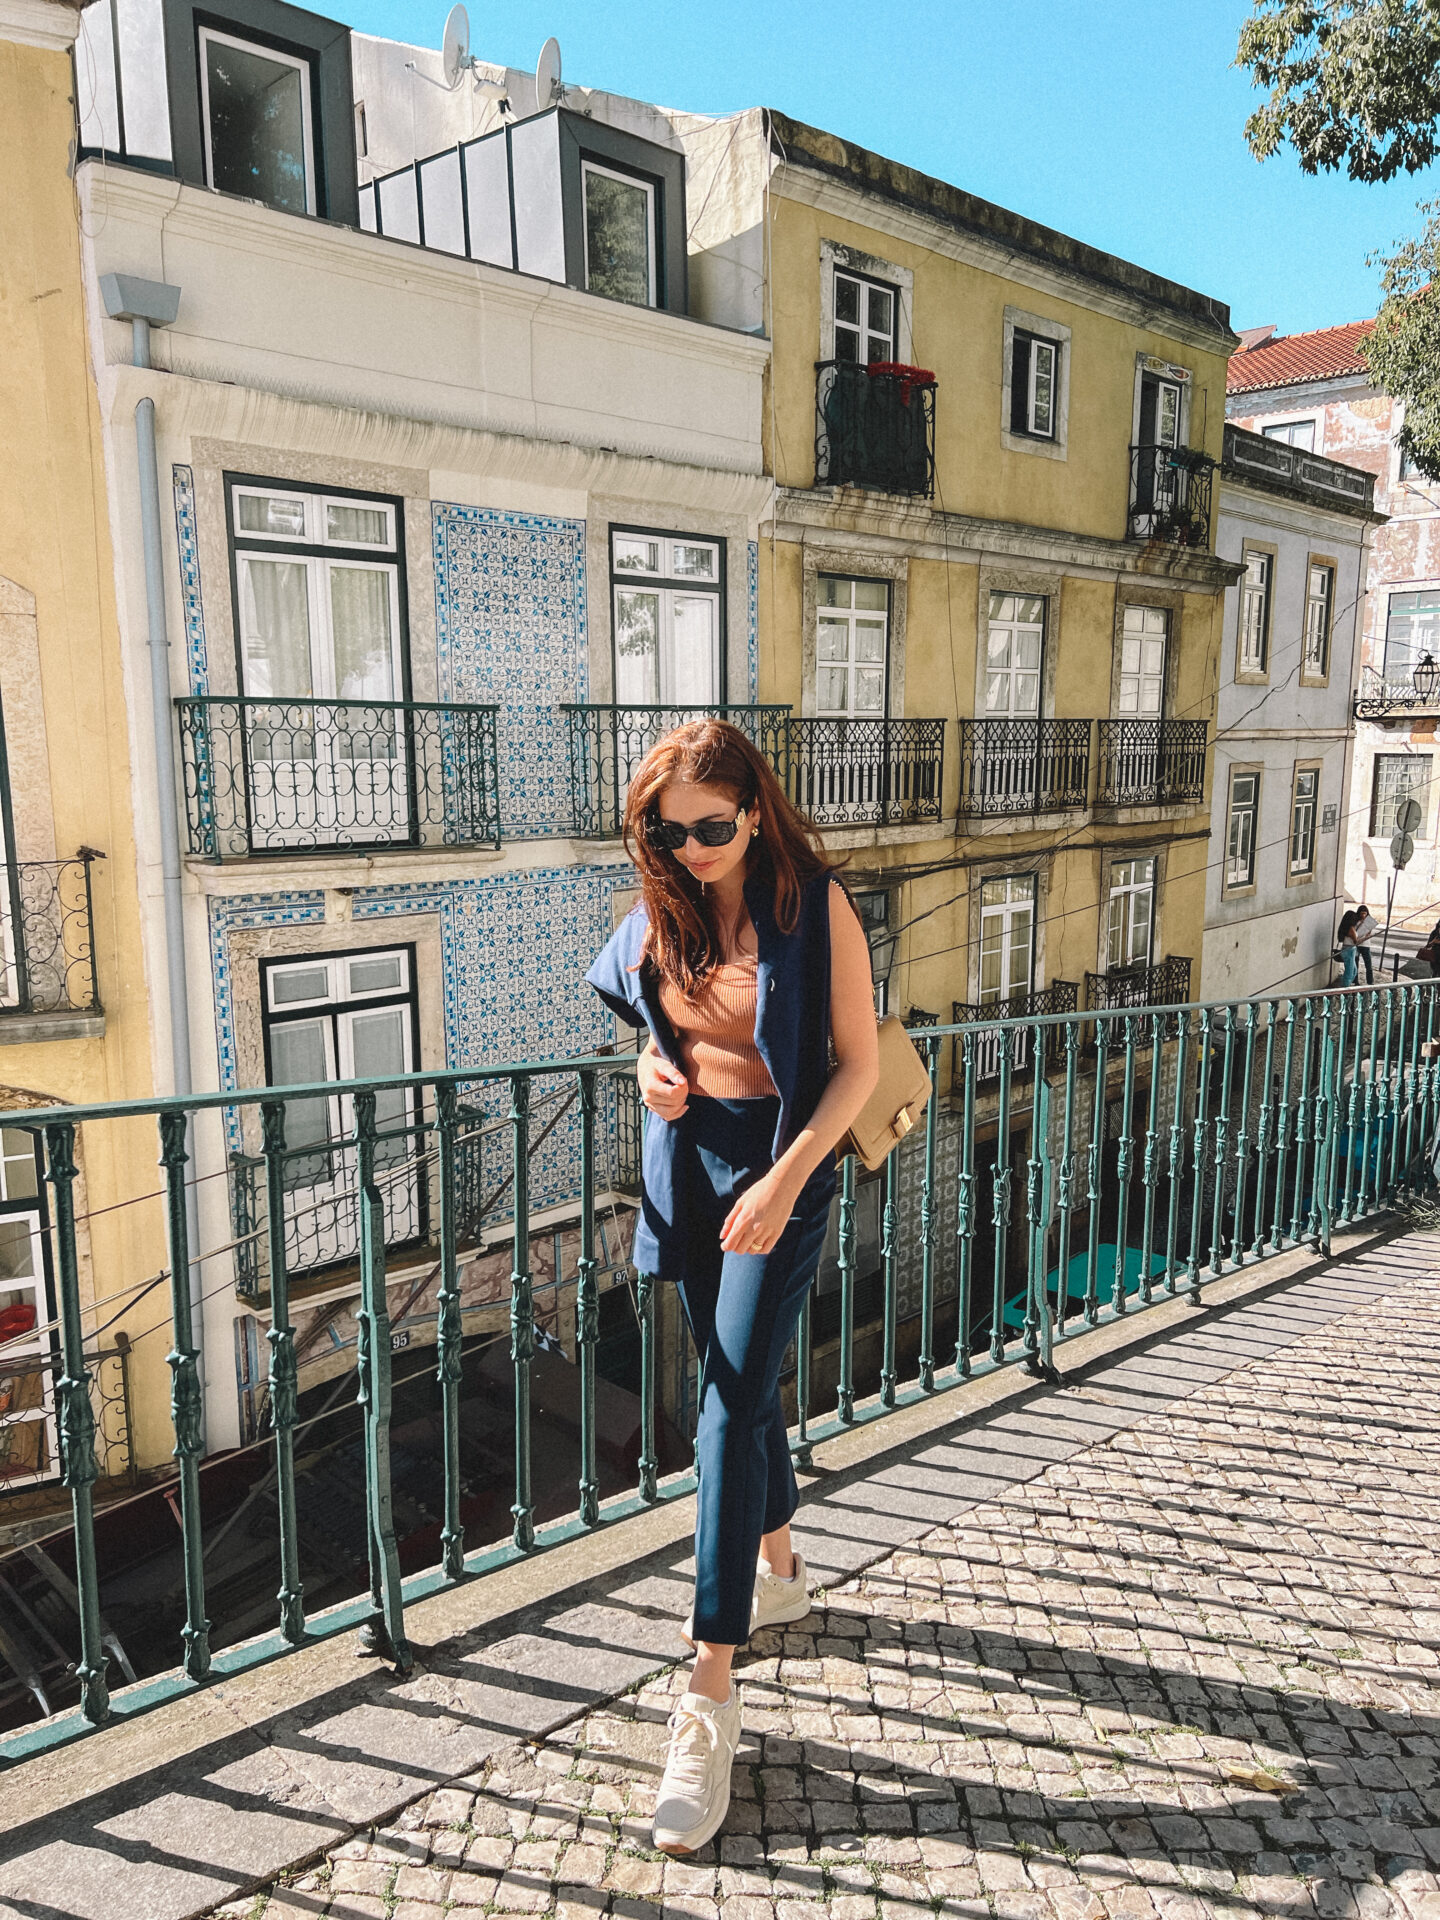 How to spend a 9-hour Layover in Lisbon, Portugal: One day in Lisbon